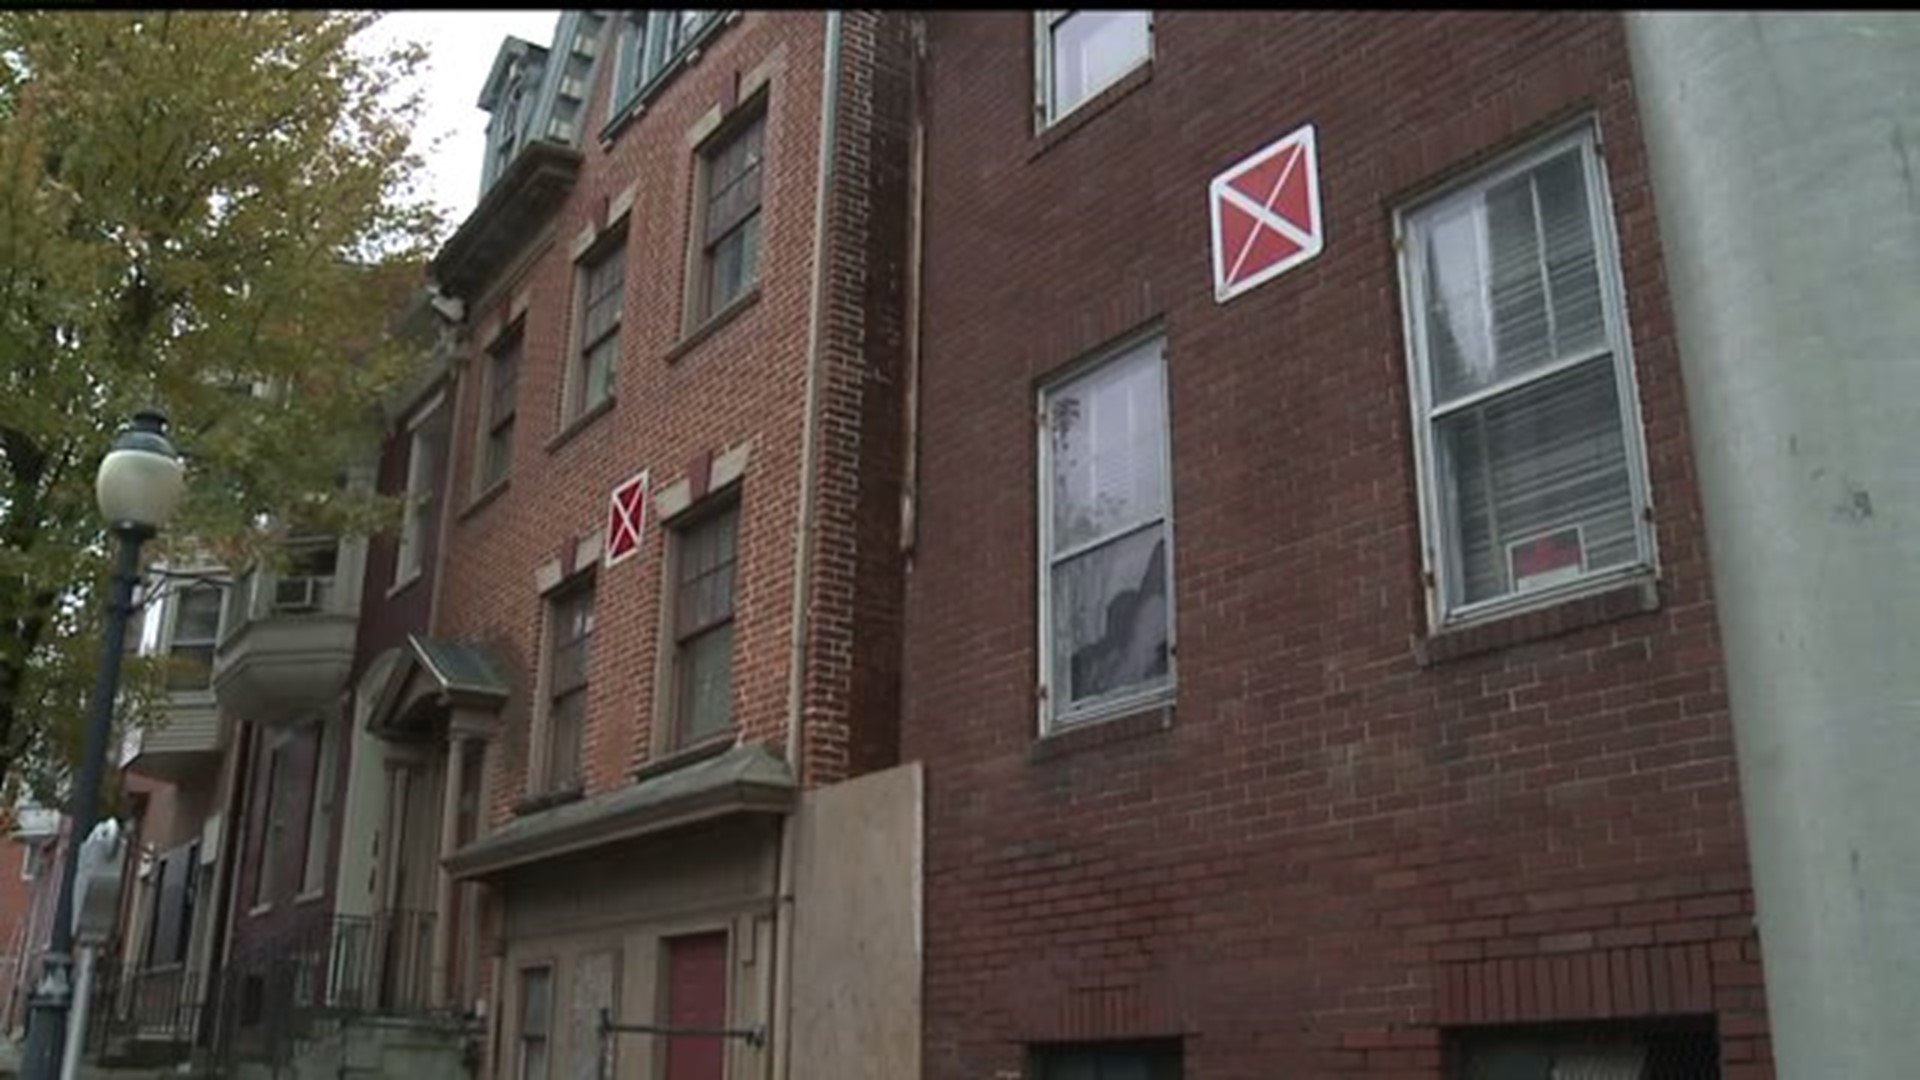 Vacant homes in York City have residents concerned